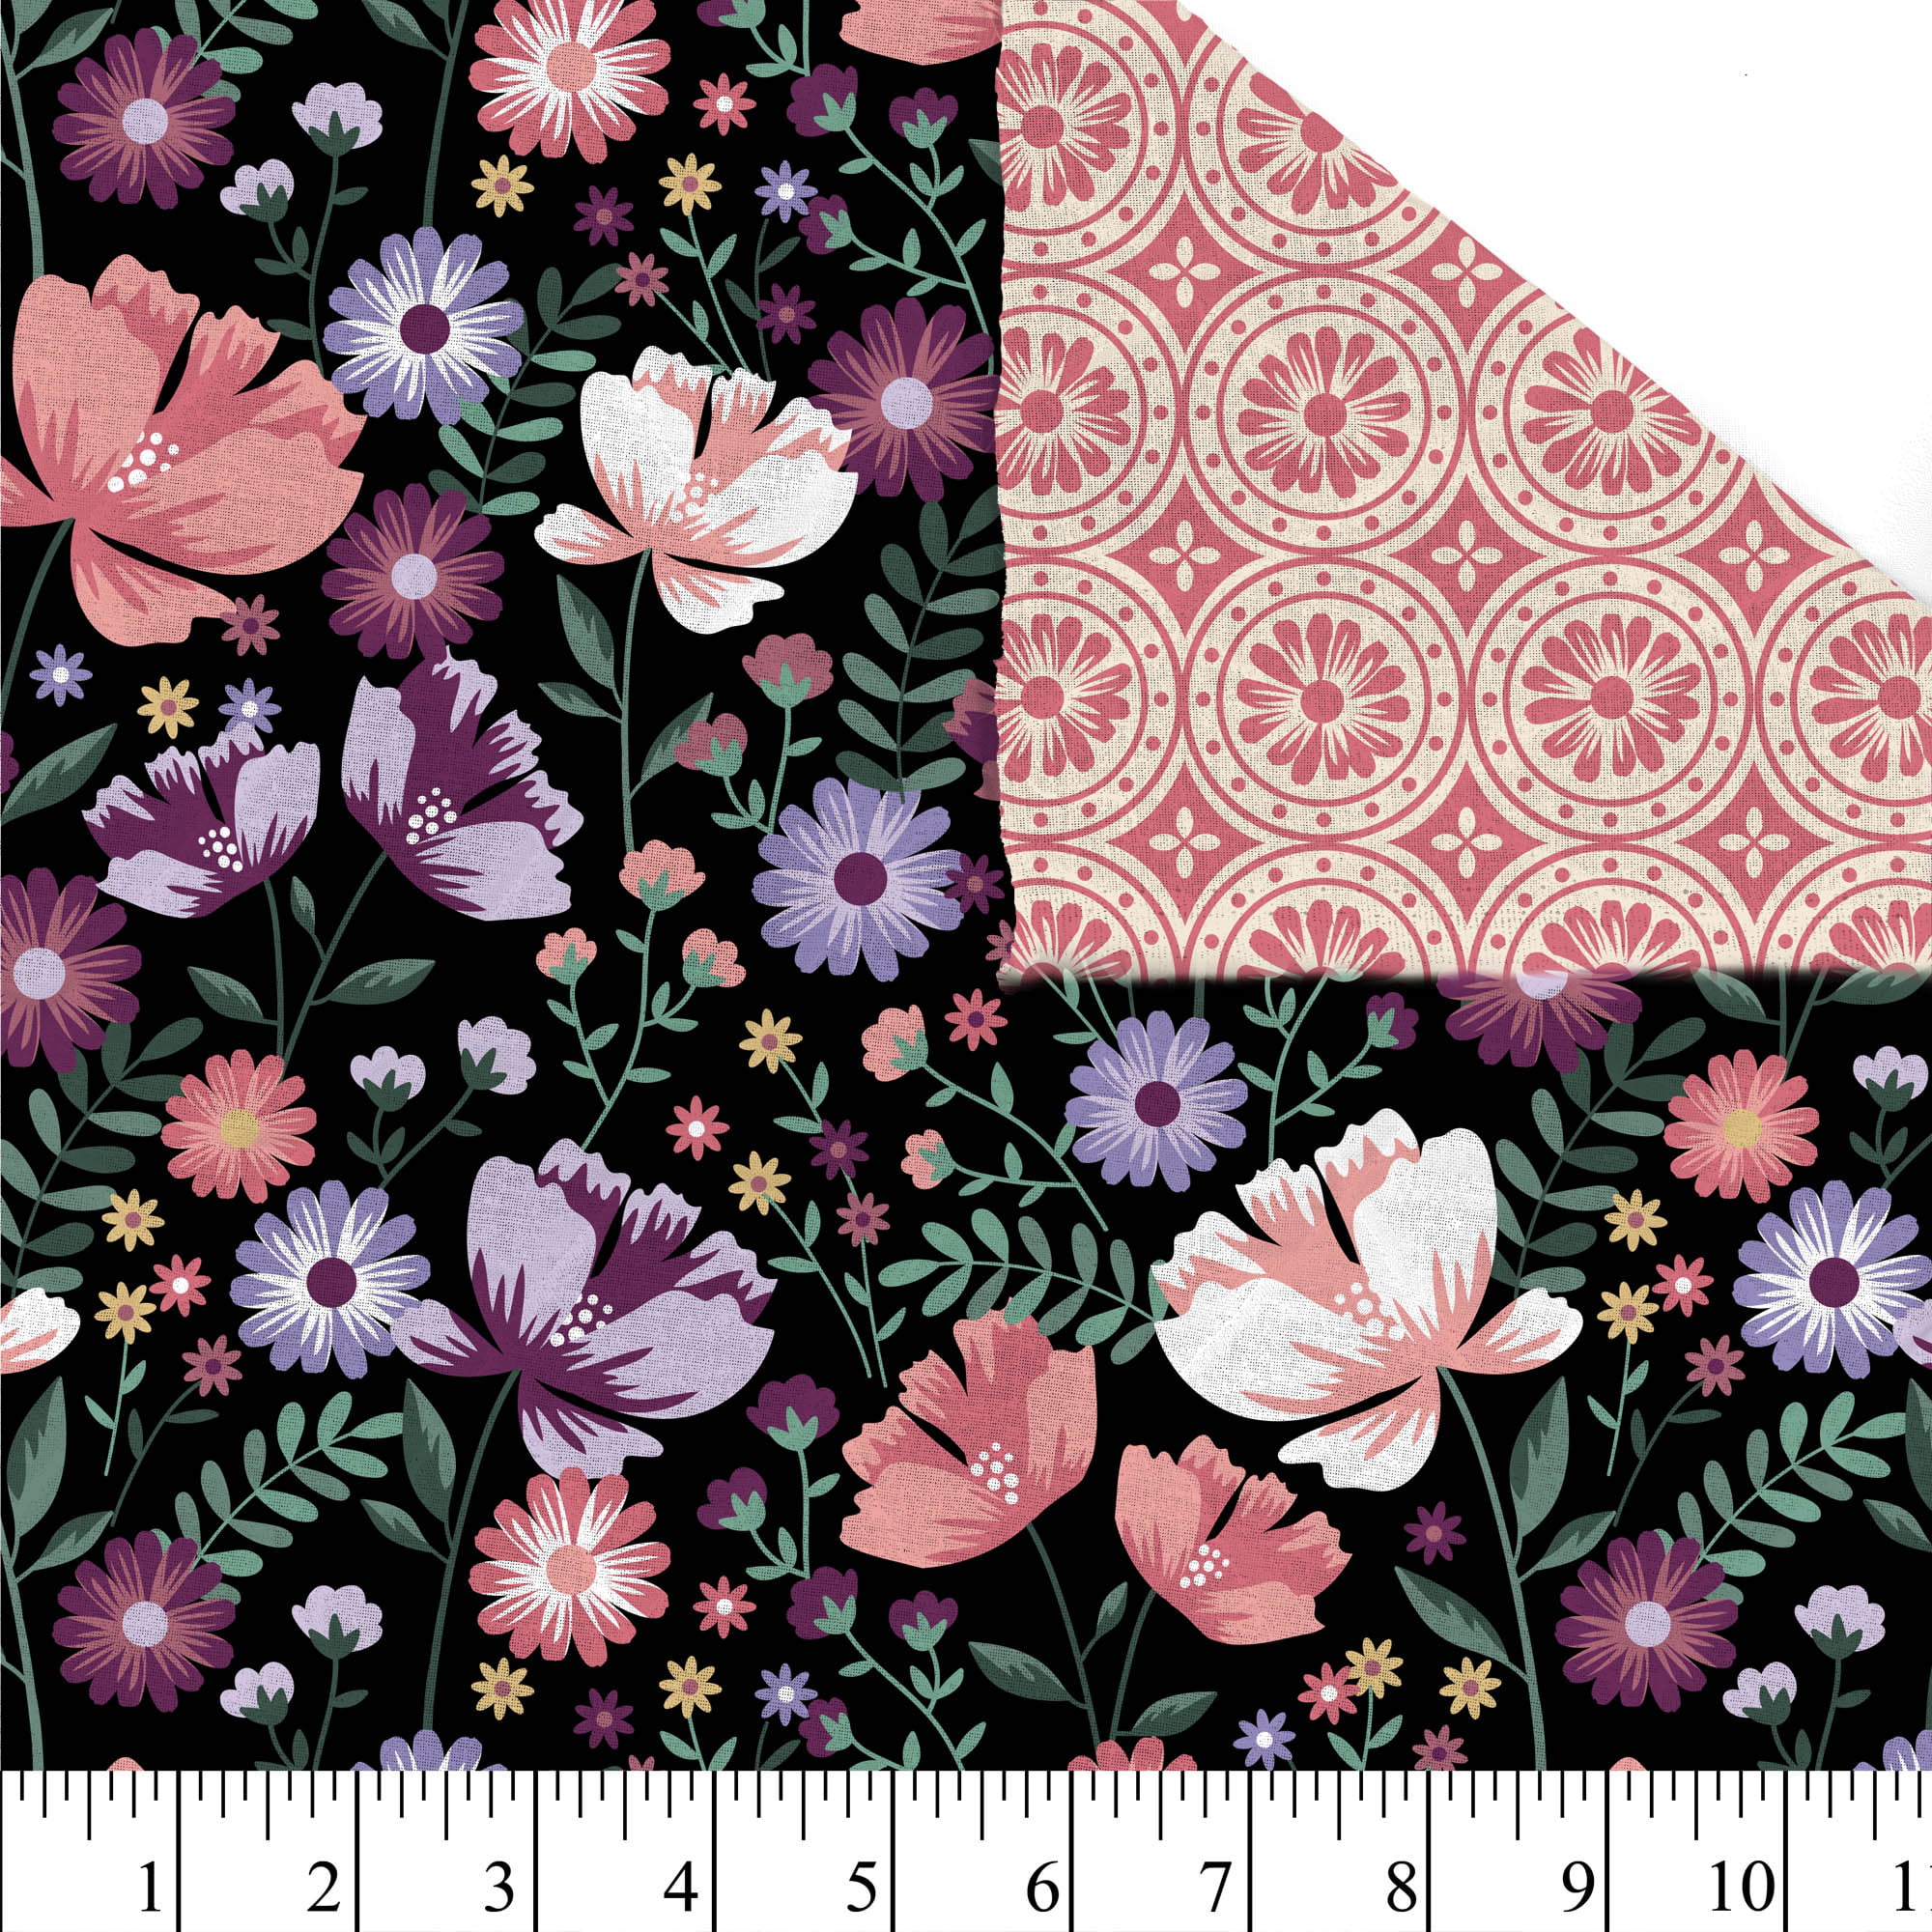 Master FAB Cotton Fabric by The Yard for Sewing DIY Crafting Fashion Design  Printed Floral Washable Cloth Bundles Voile;Full Width cuttable39 x